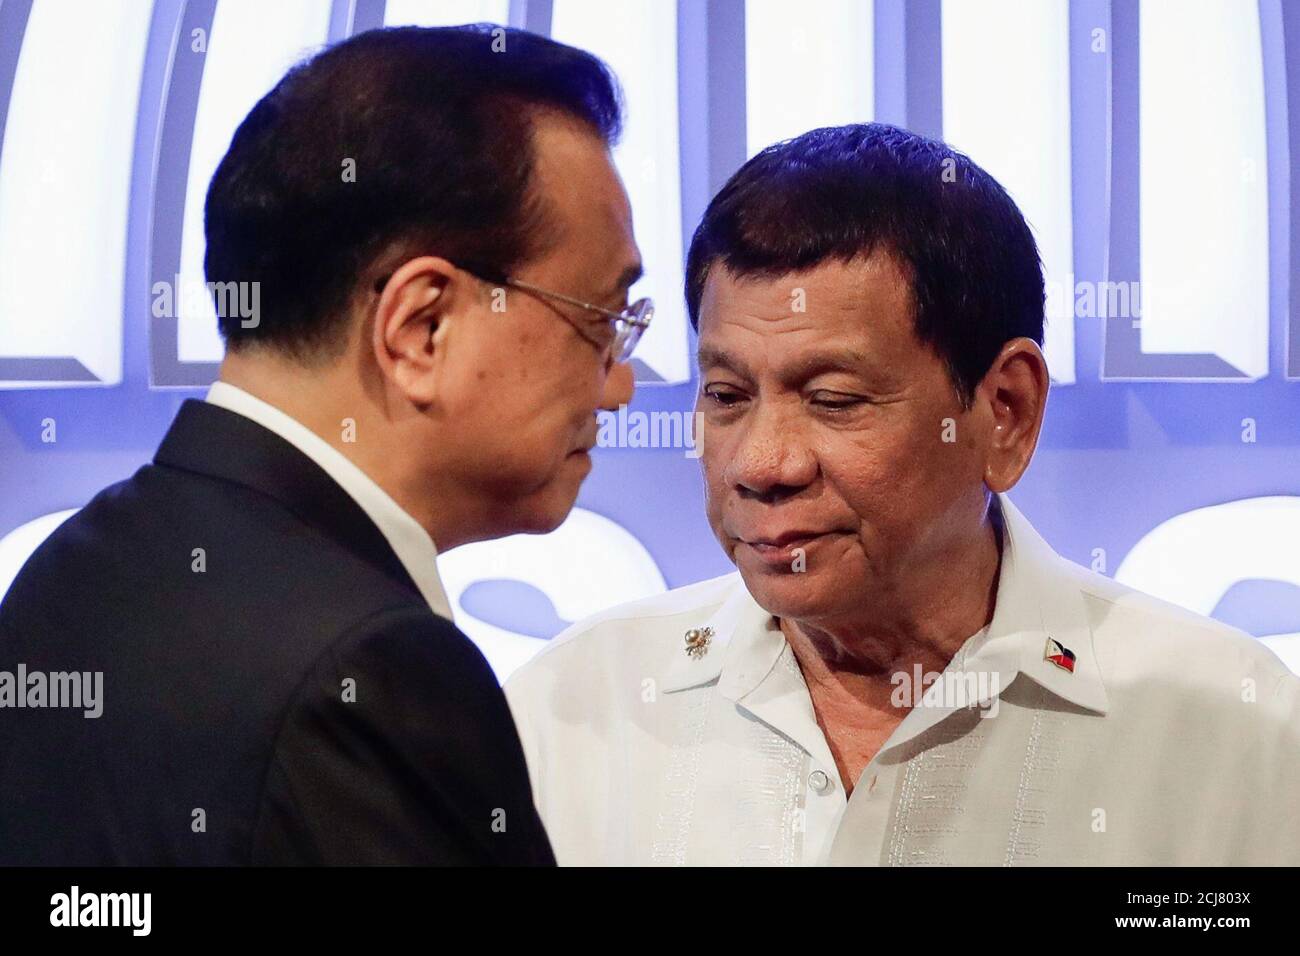 Chinese Premier Li Keqiang (L) and Philippine President Rodrigo Duterte (R) before the opening ceremony of the 31st Association of Southeast Asian Nations (ASEAN) Summit in Manila, Philippines November 13, 2017. The Philippines is hosting the 31st Association of Southeast Asian Nations (ASEAN) Summit and Related Meetings from 10 to 14 November. REUTERS/Mark Cristino/Pool Stock Photo